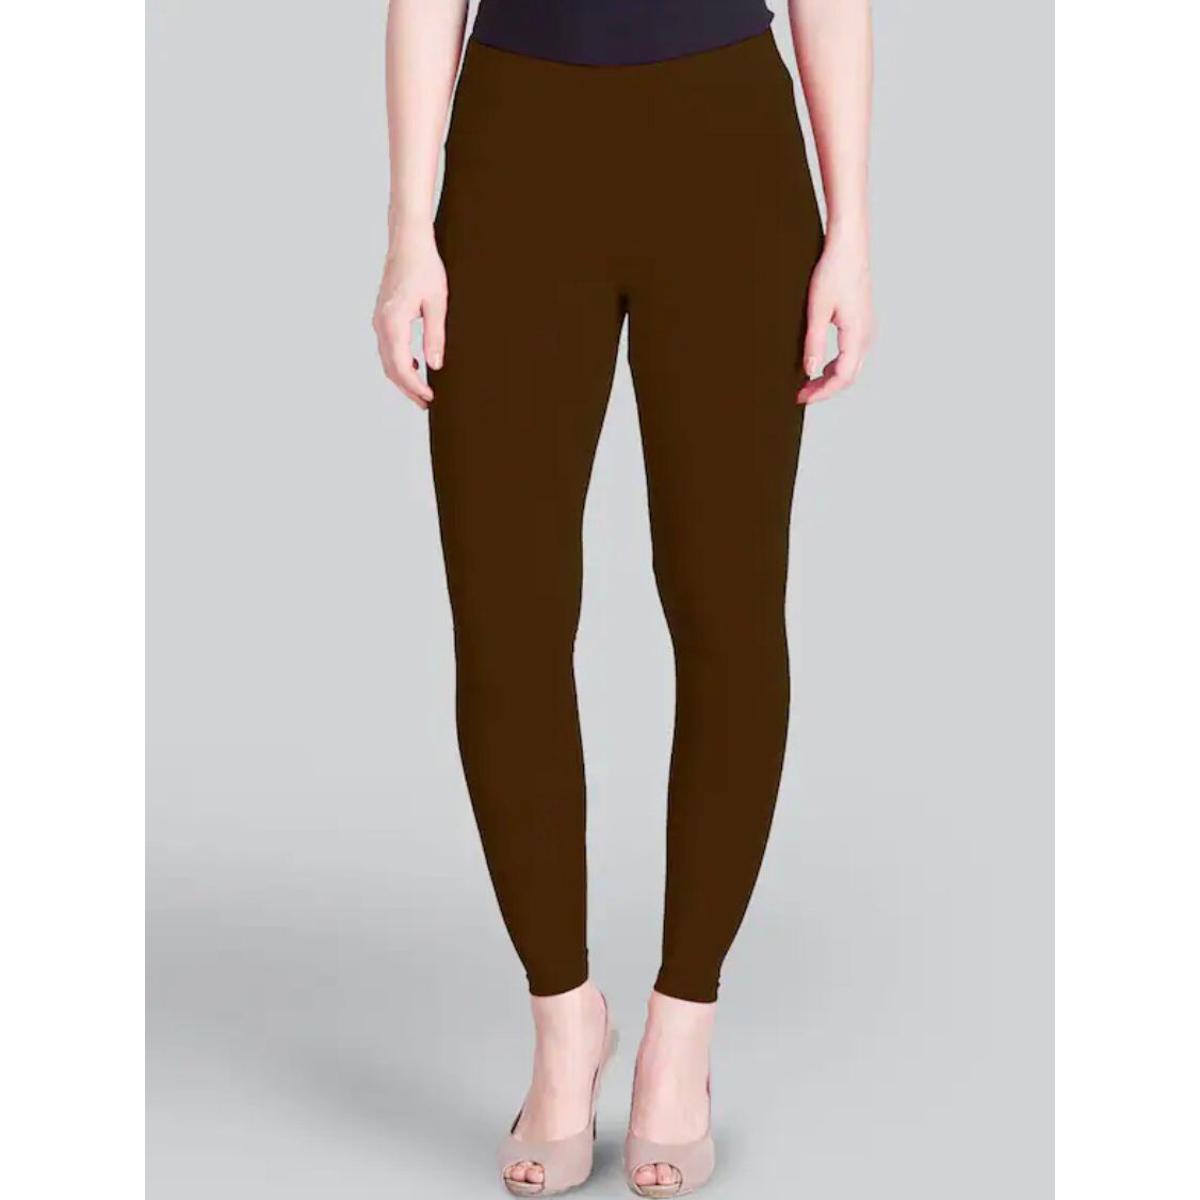 Brown Tights for Women